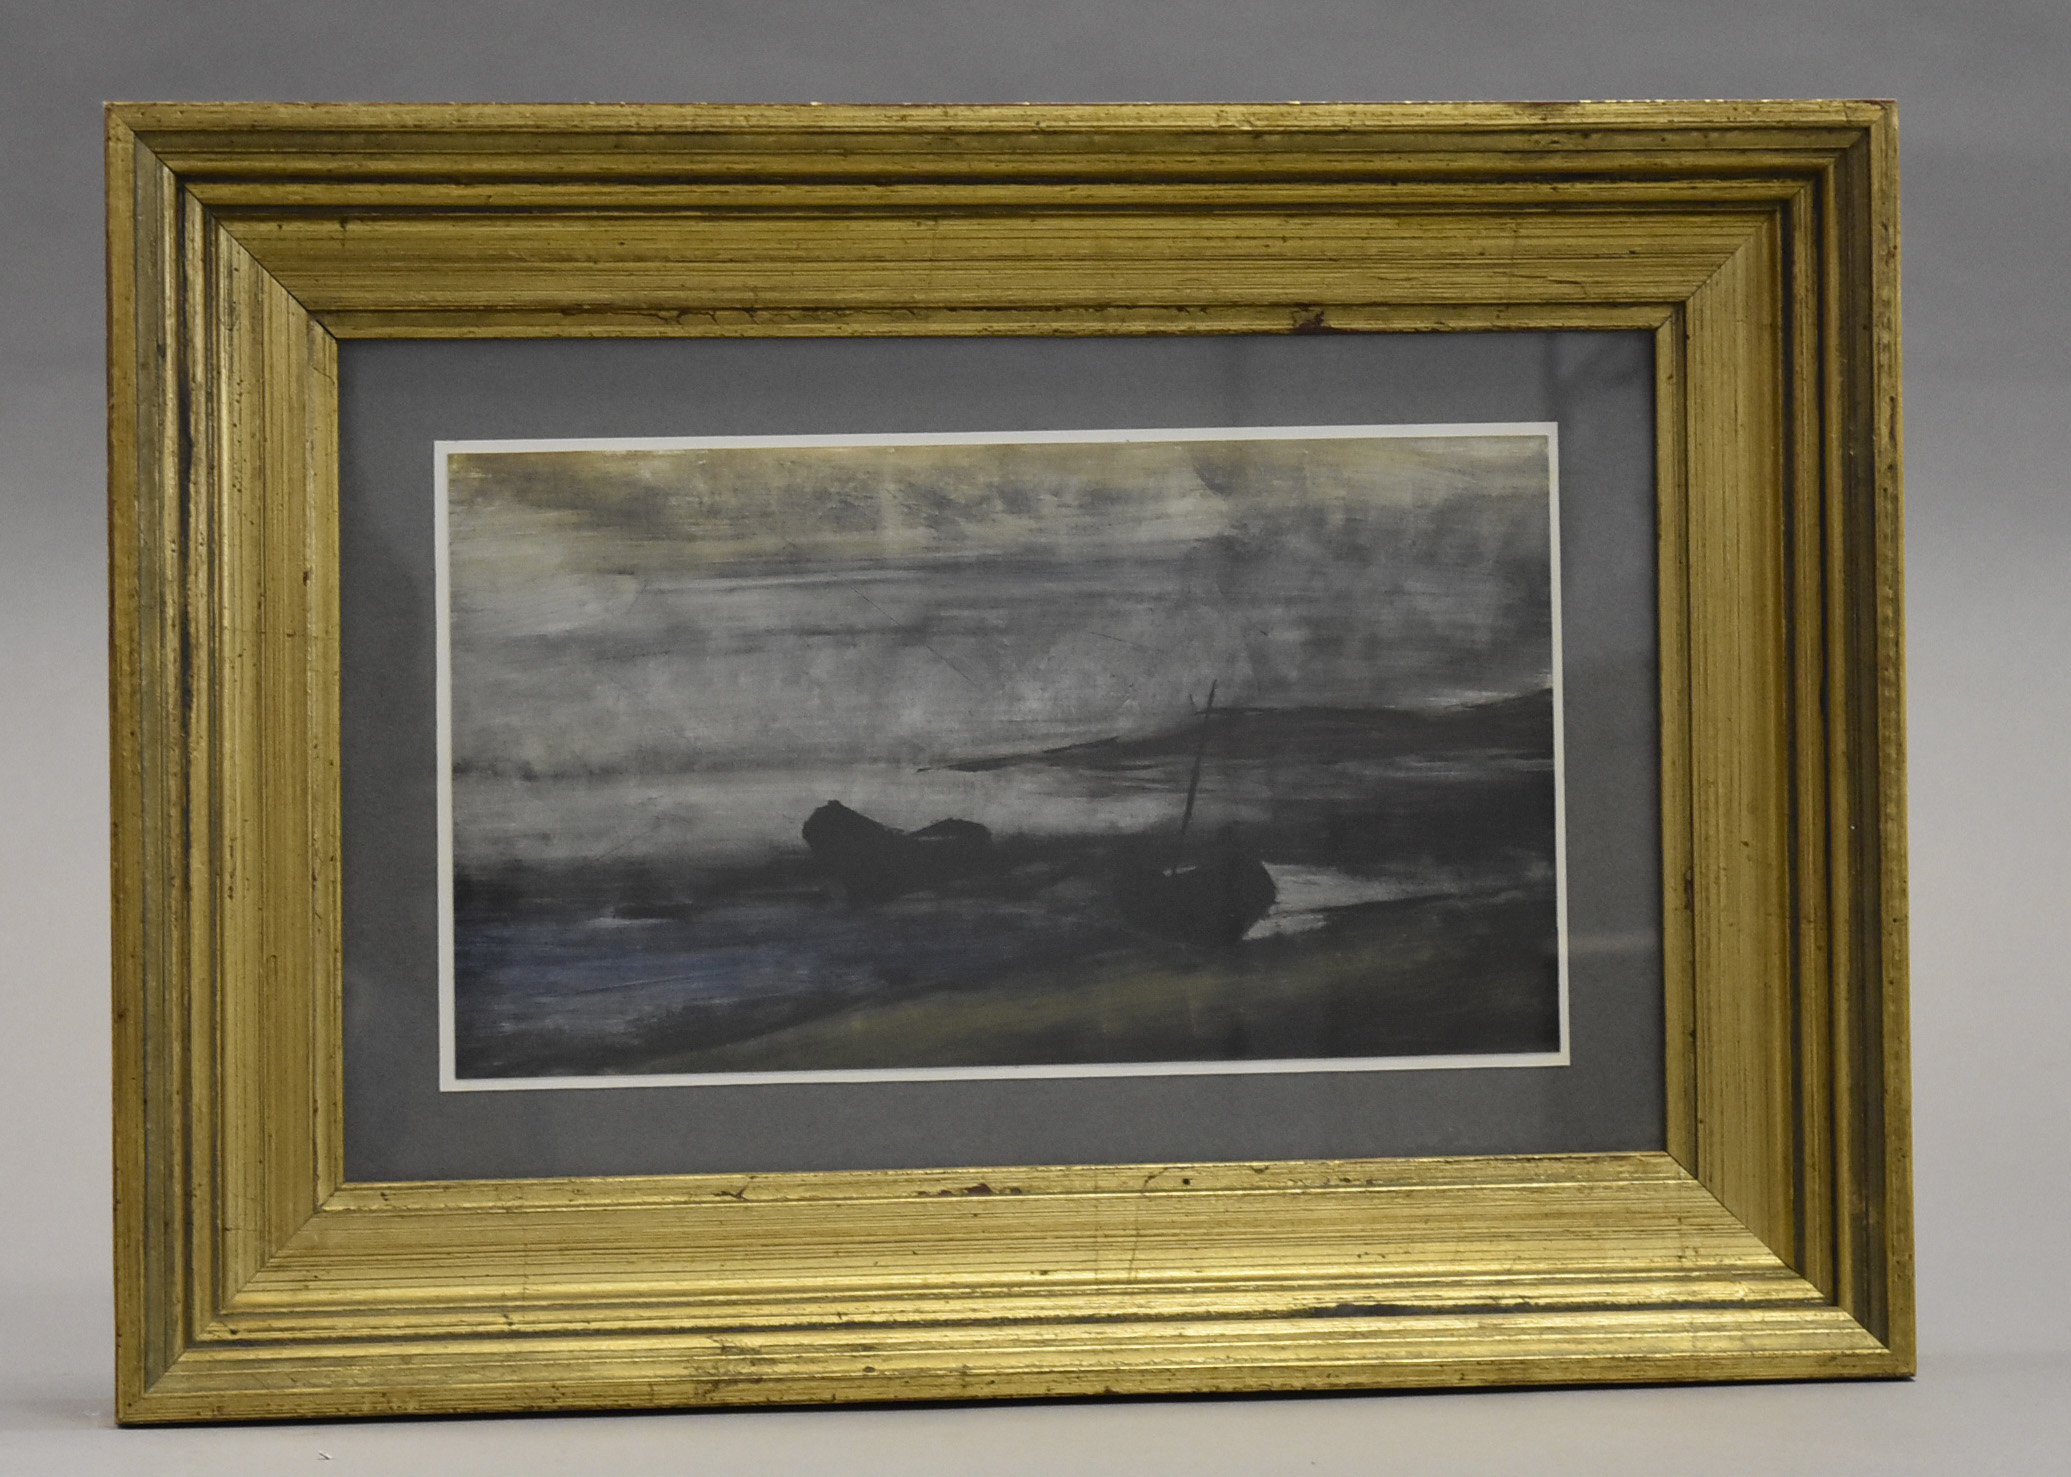 20th Century British School oil on card, 'Fishing Boats on the Beach at Night', 16 cm x 28.5 cm,; - Image 5 of 5